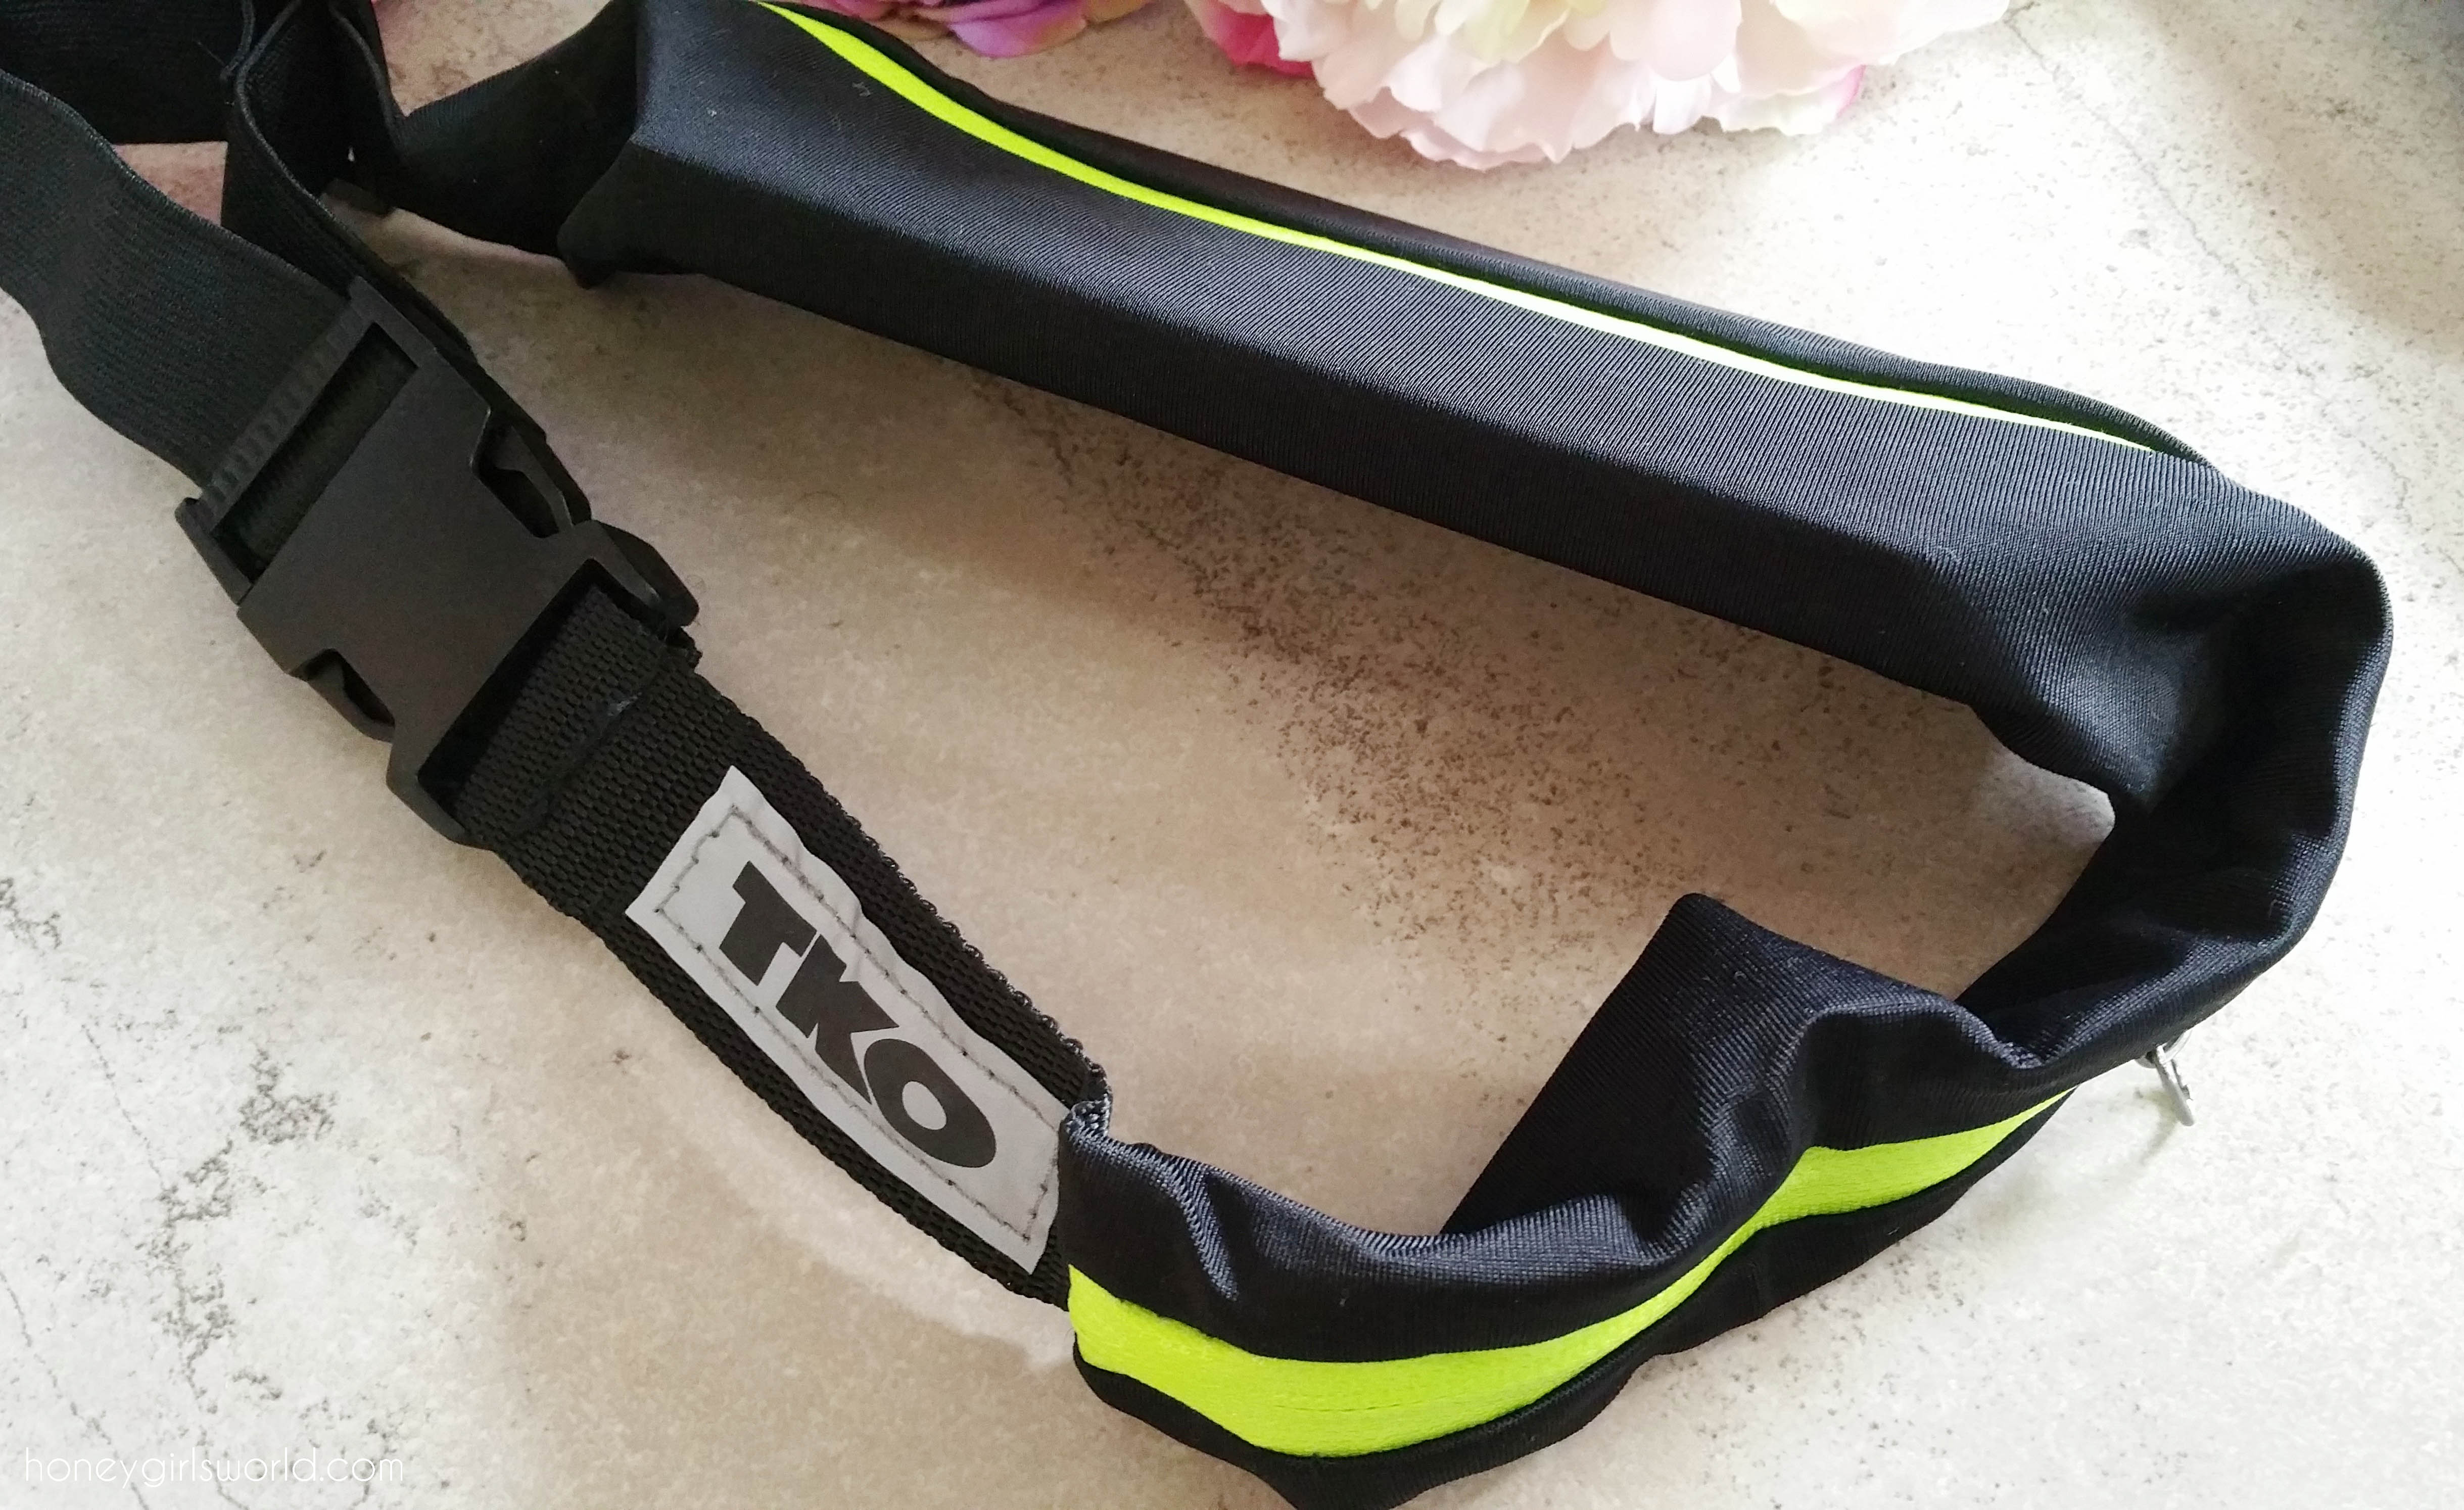 TKO Running belt, TKO, running belt, review, product review, exercise belt, exercise, workout, 